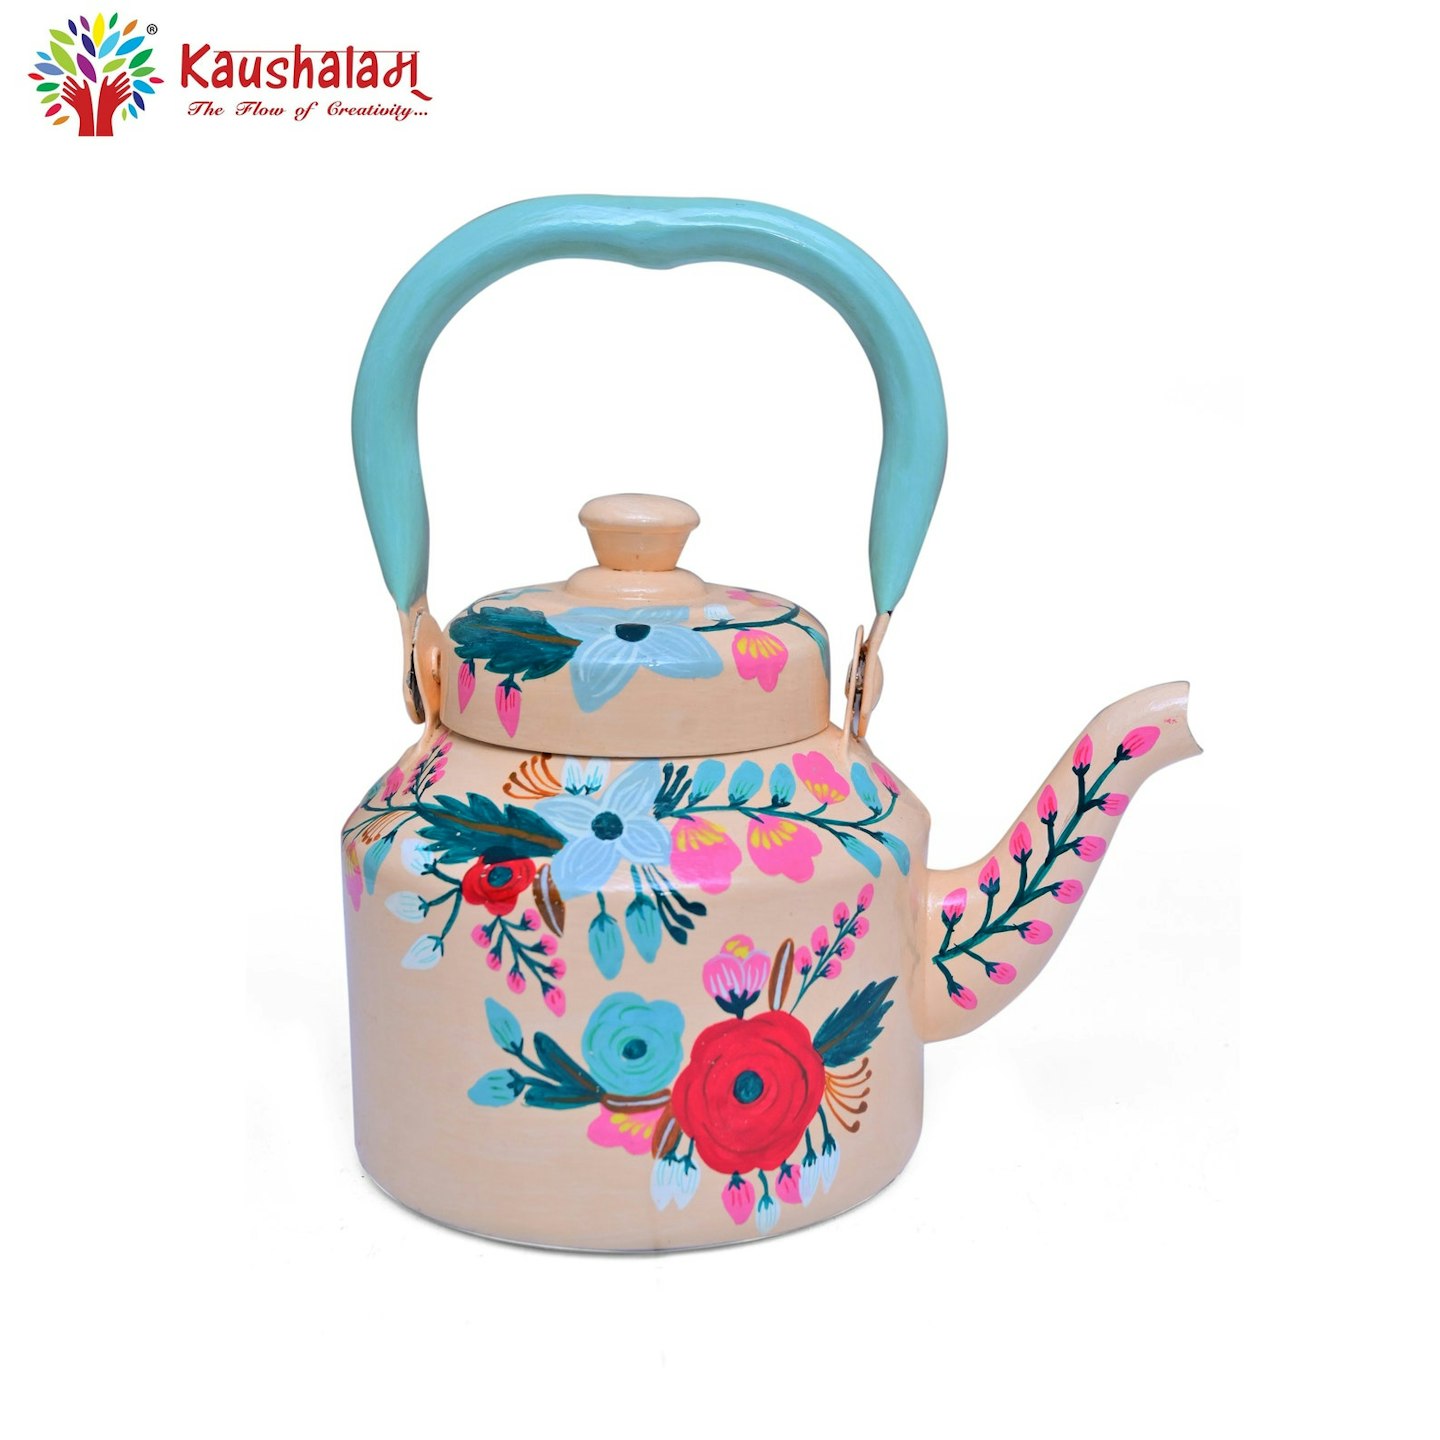 Hand Painted Stainless Steel Induction Cook Top Tea Kettle